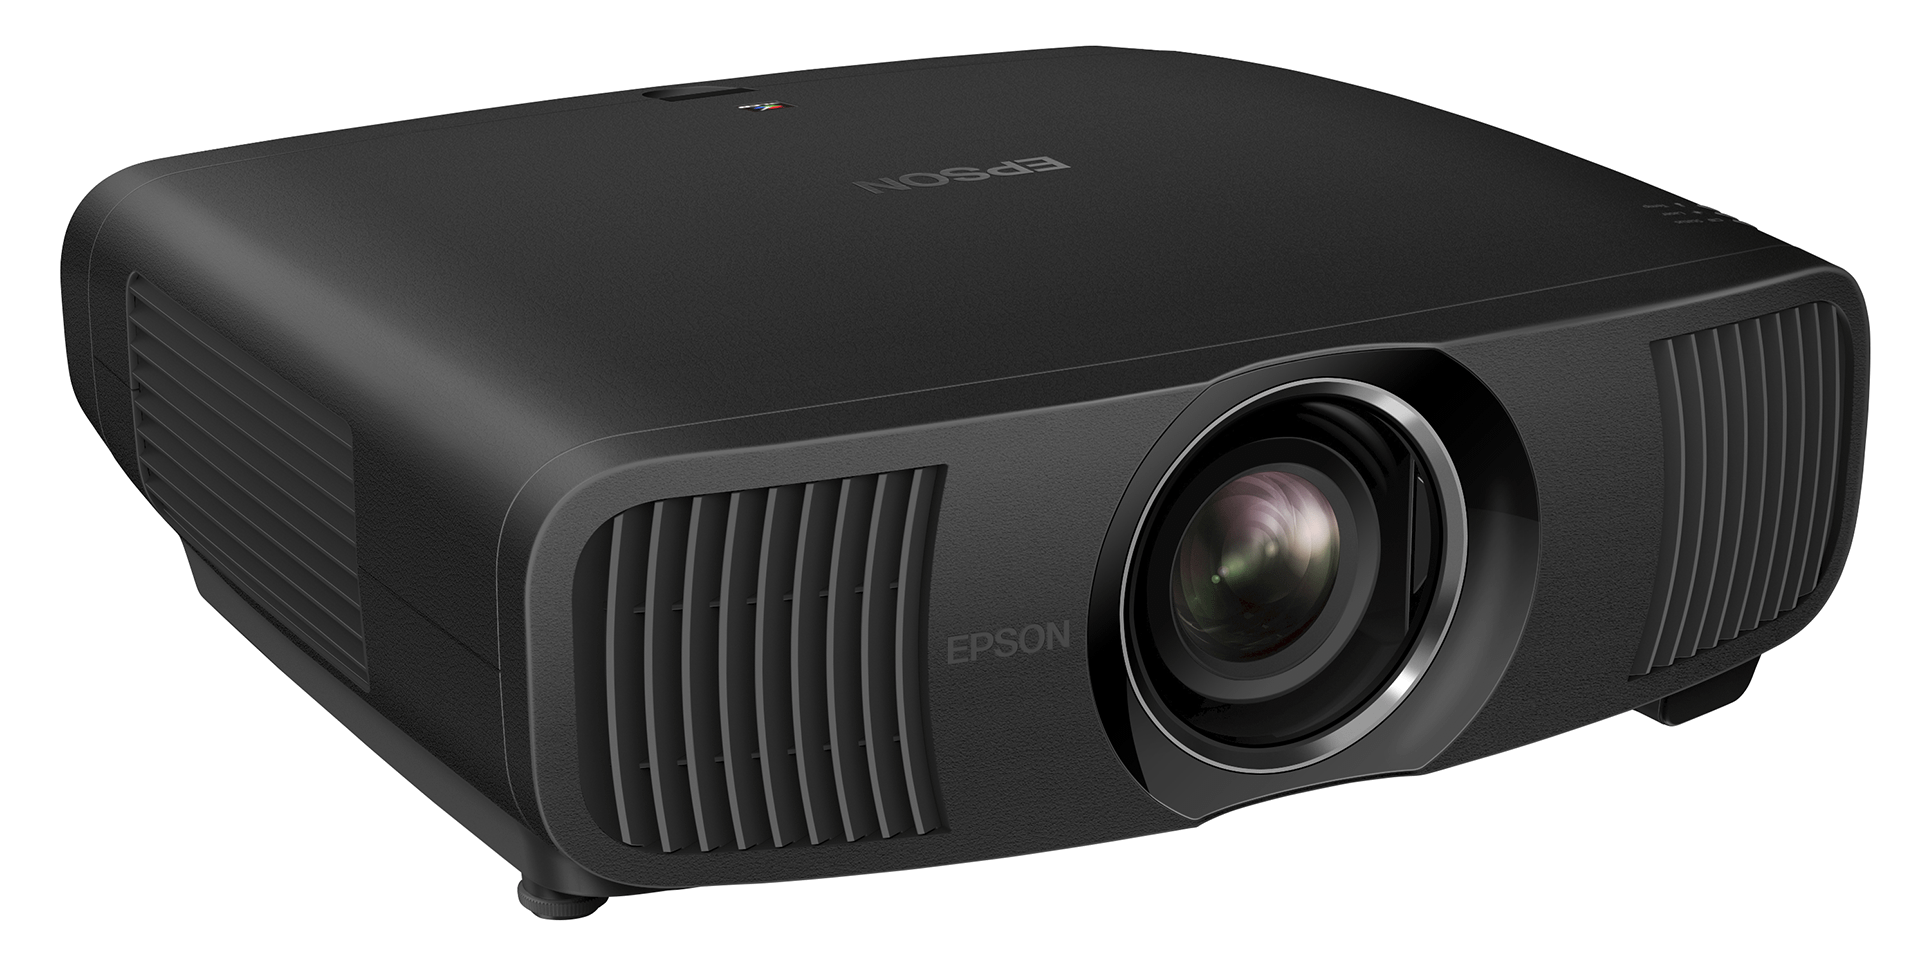 Is the LS12000 the best value for a $5000 home theater projector? 47a0552b image